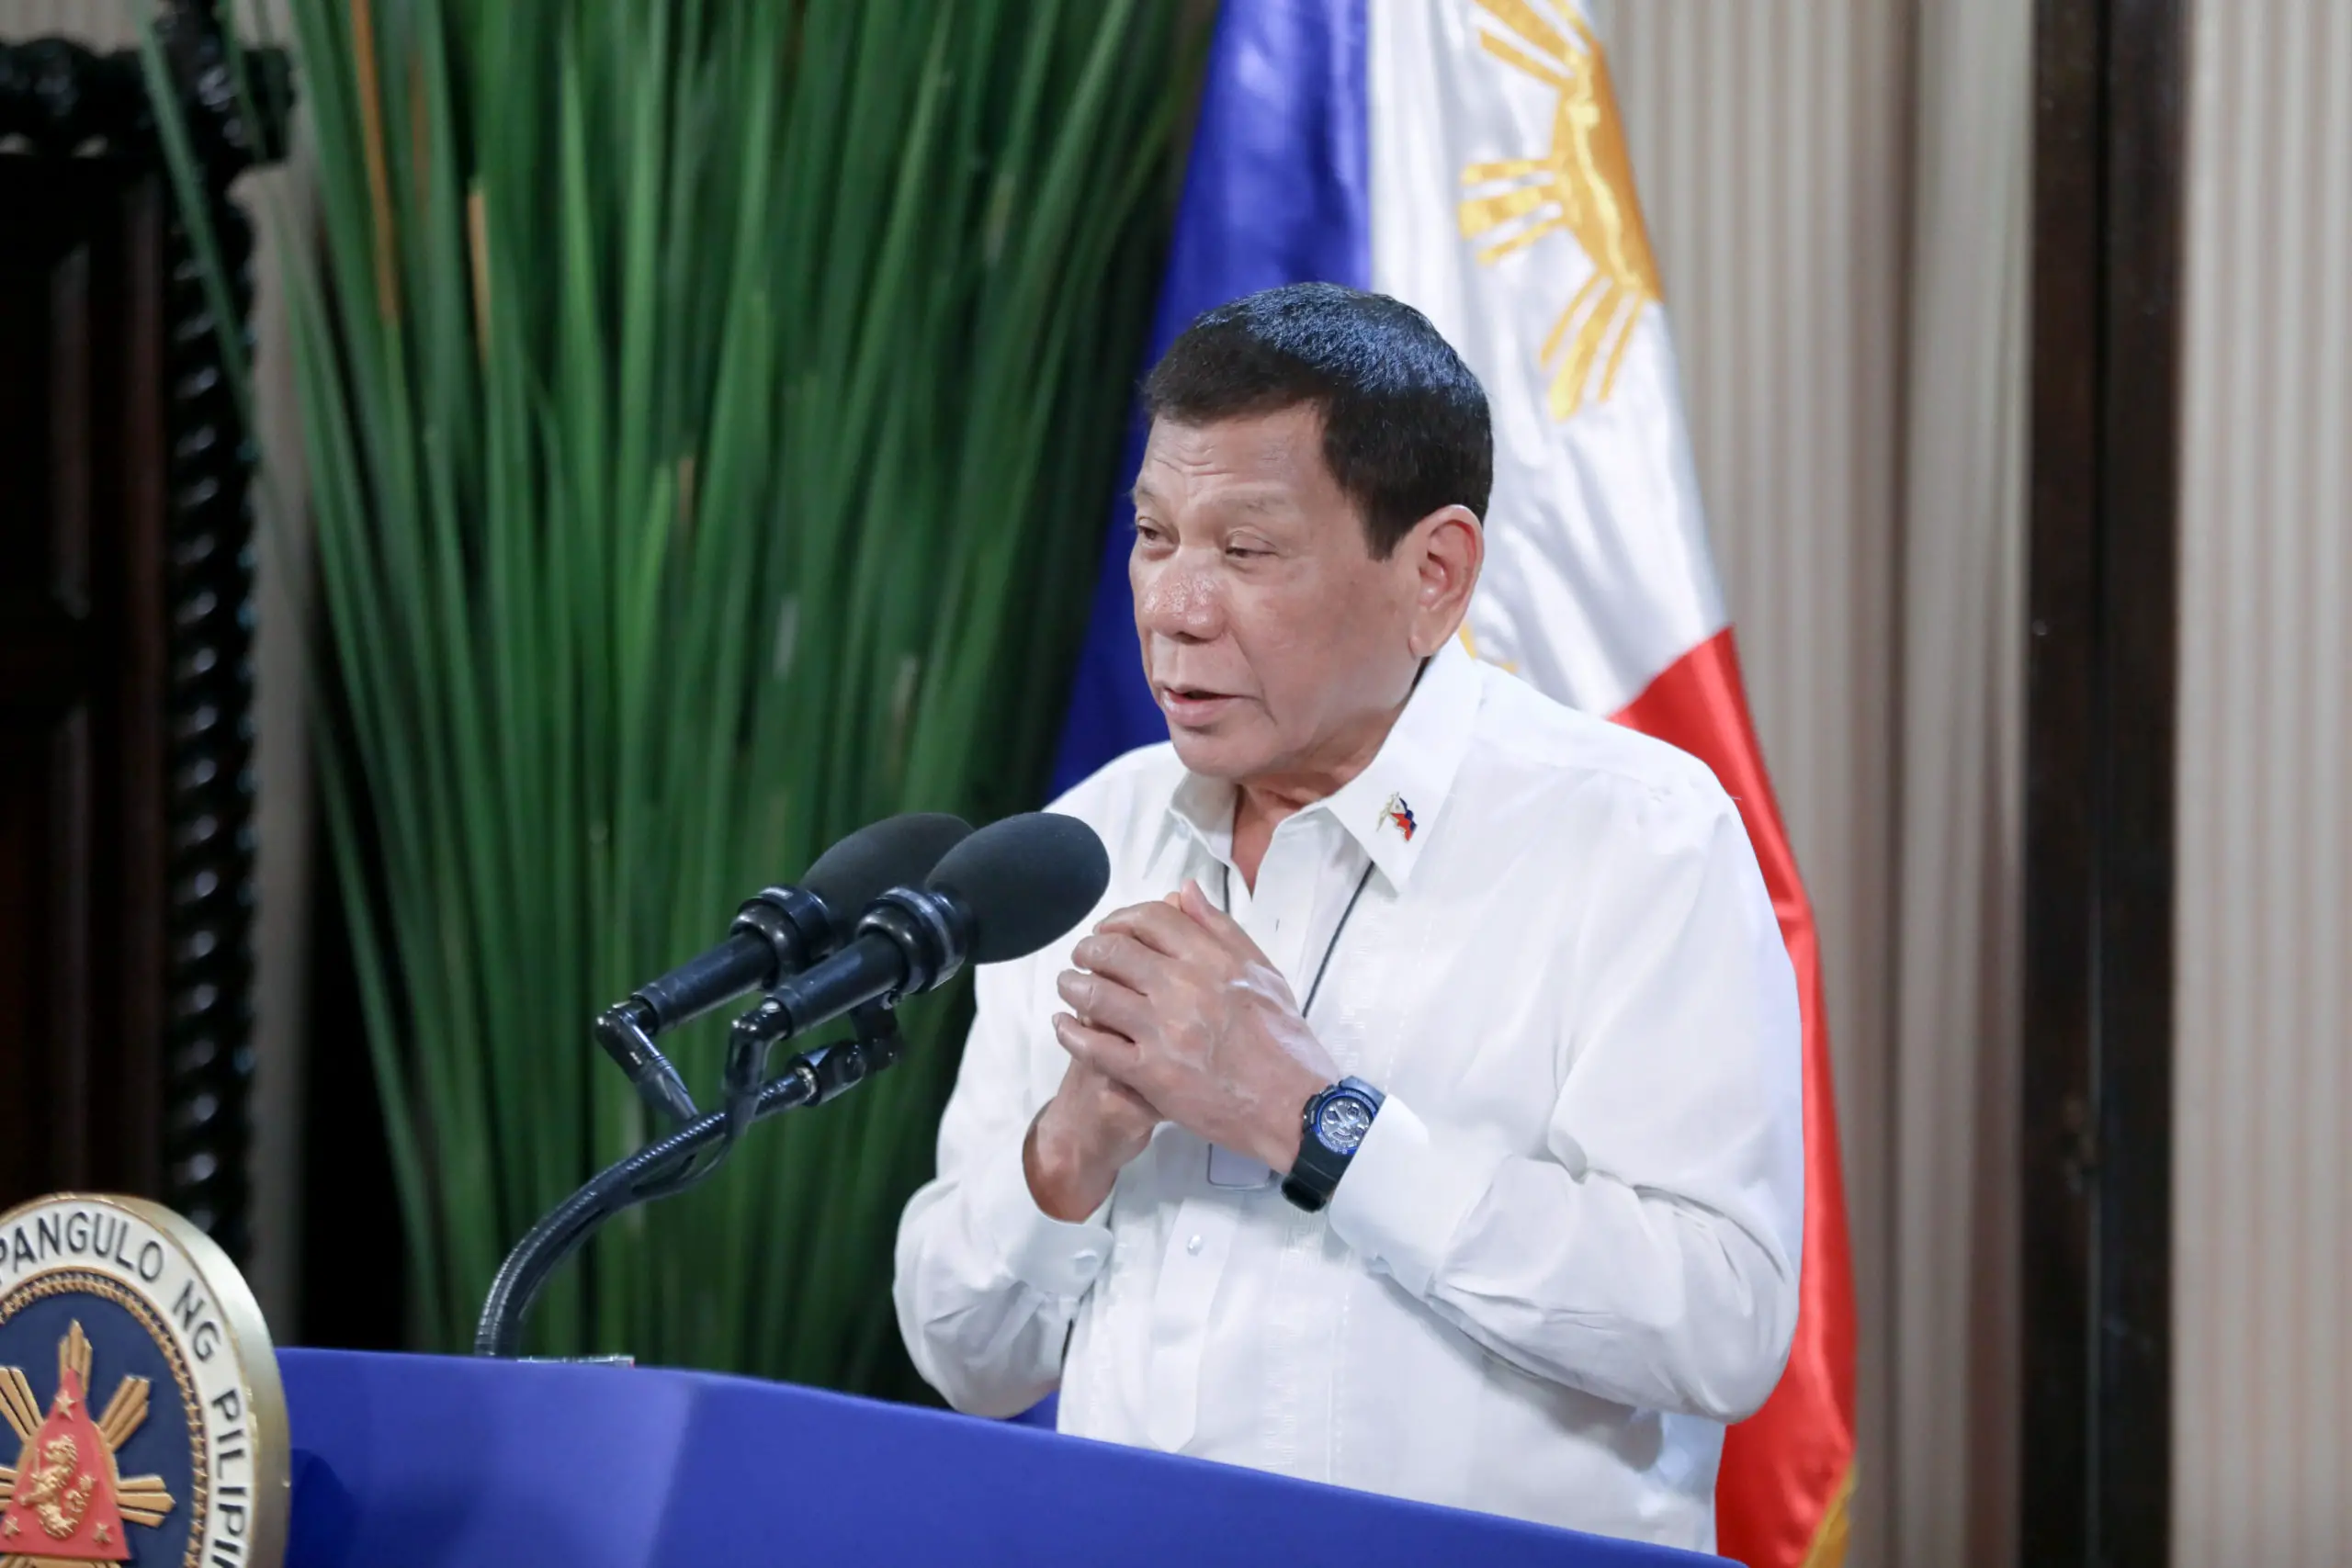 Duterte is not in favor of opening the classes without a vaccine